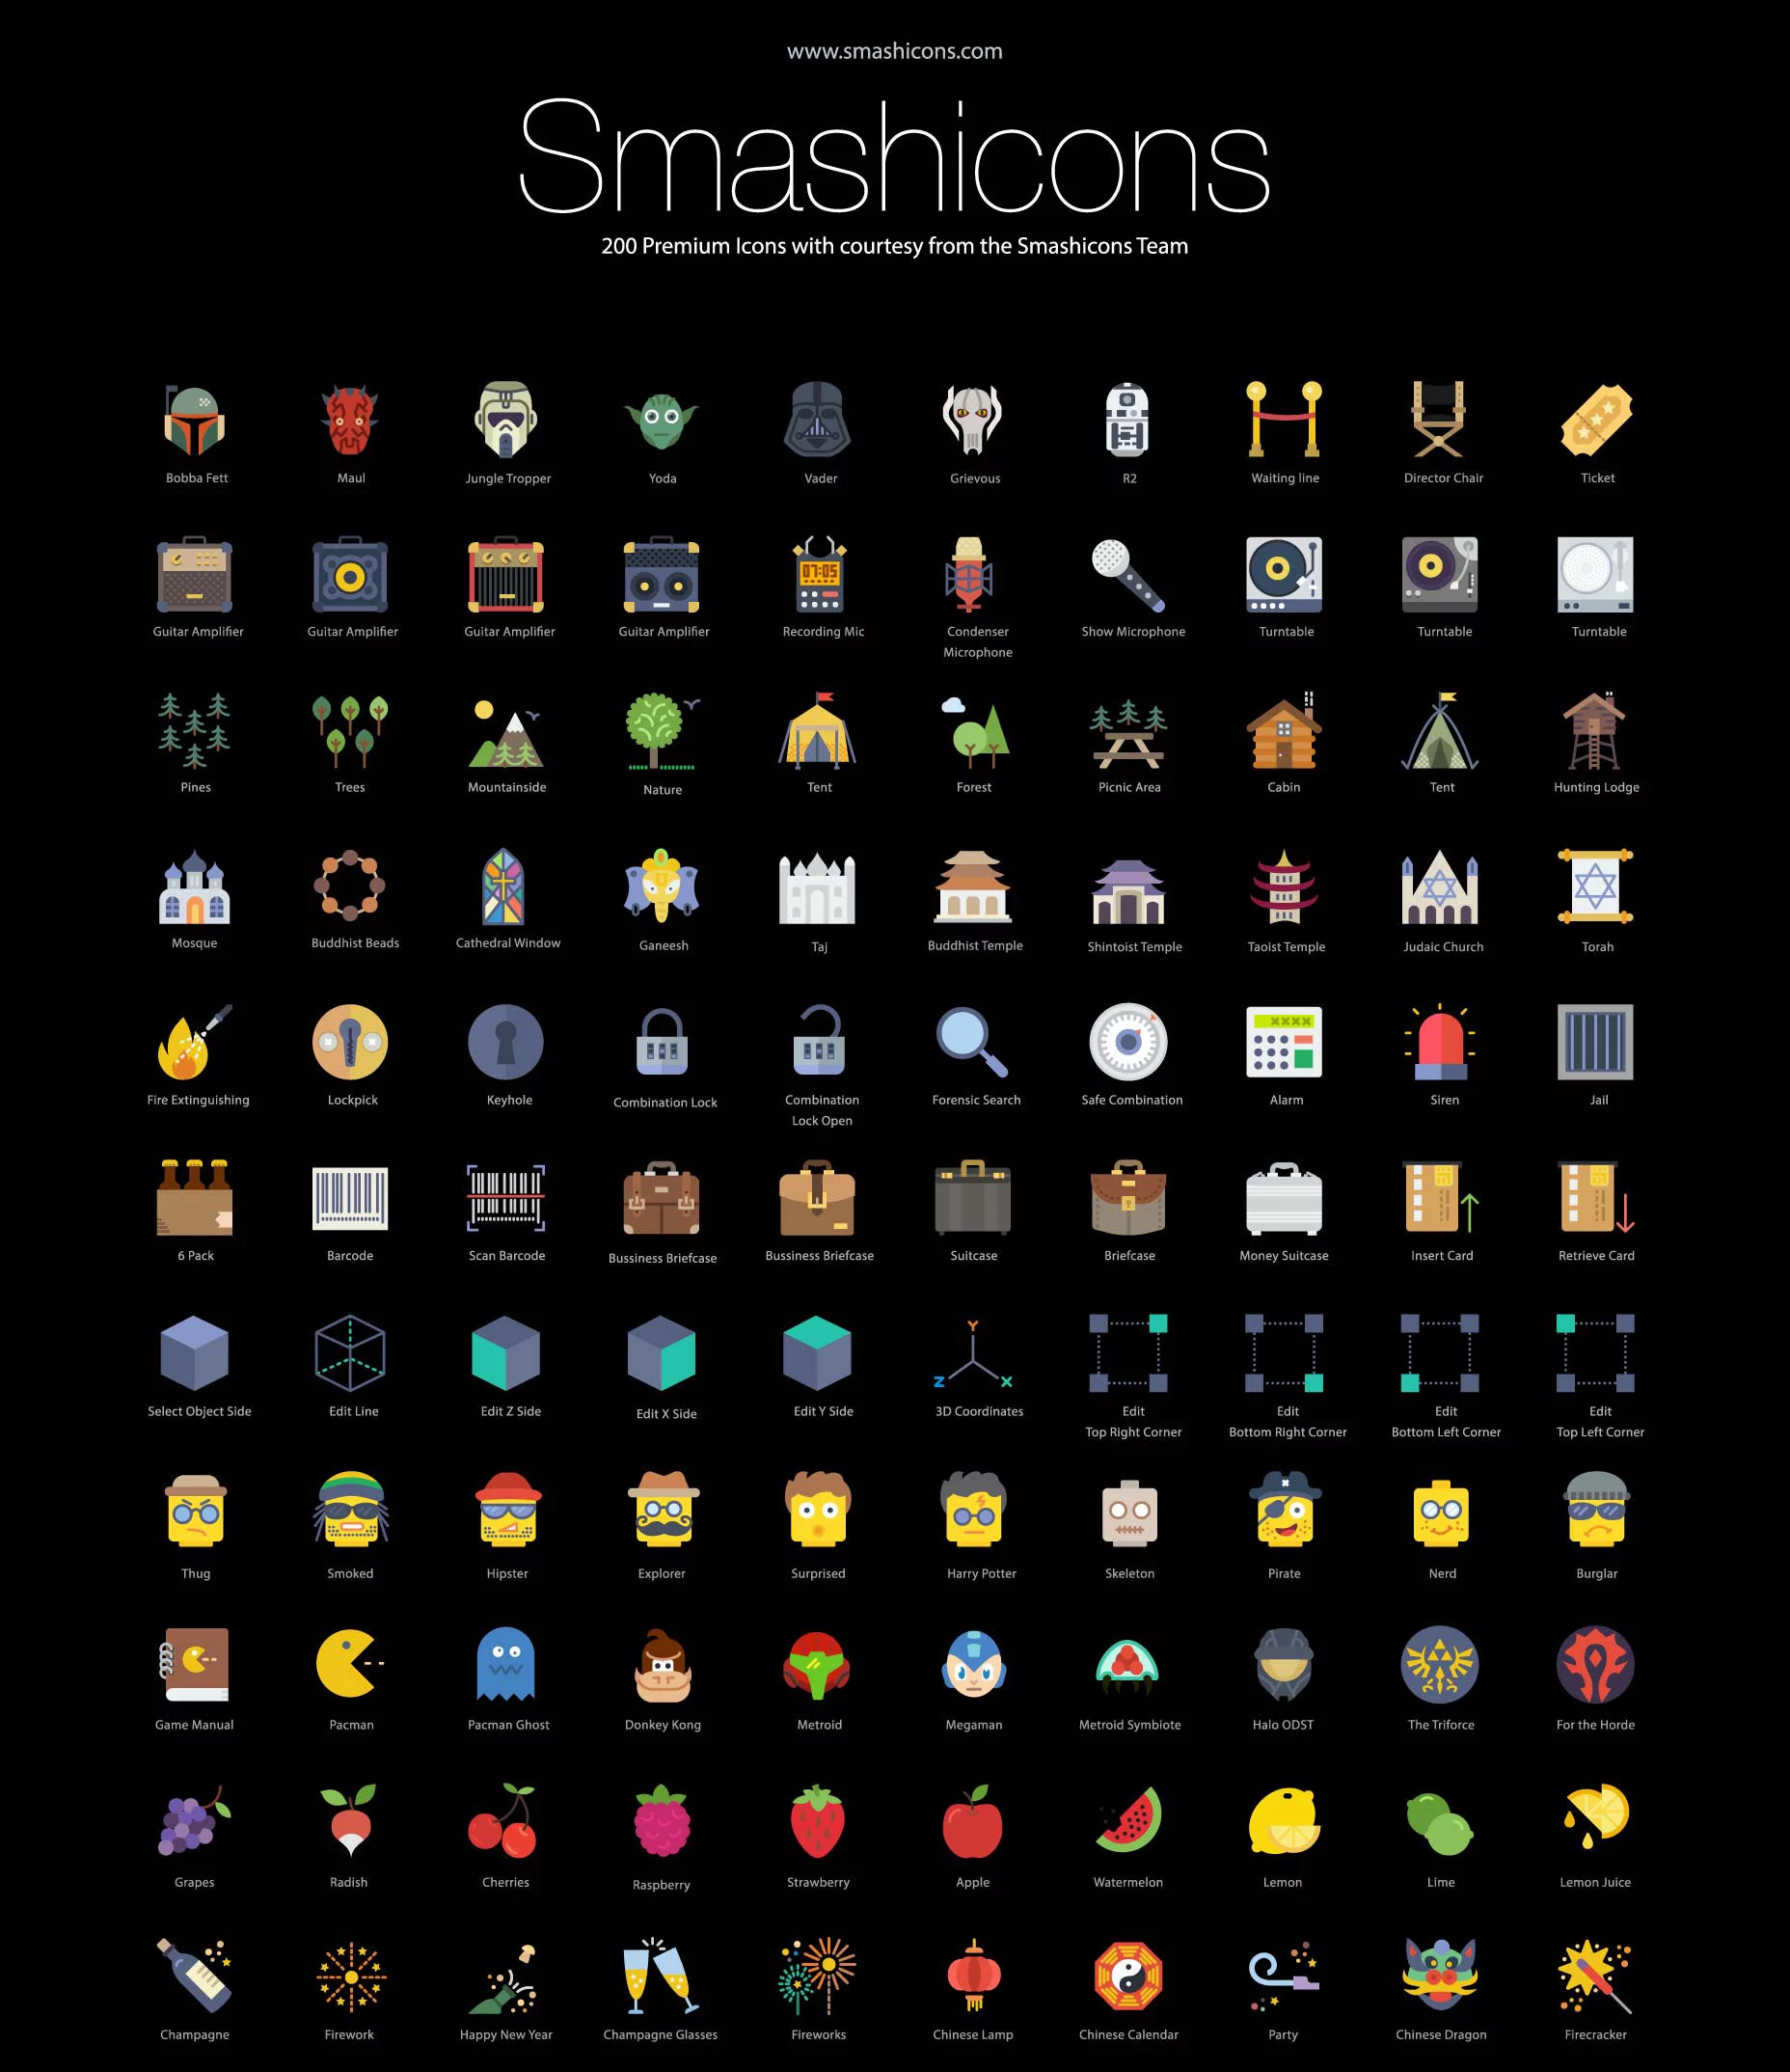 RetinaIcons - The Largest and Most Complete iOS Icon Set in the World